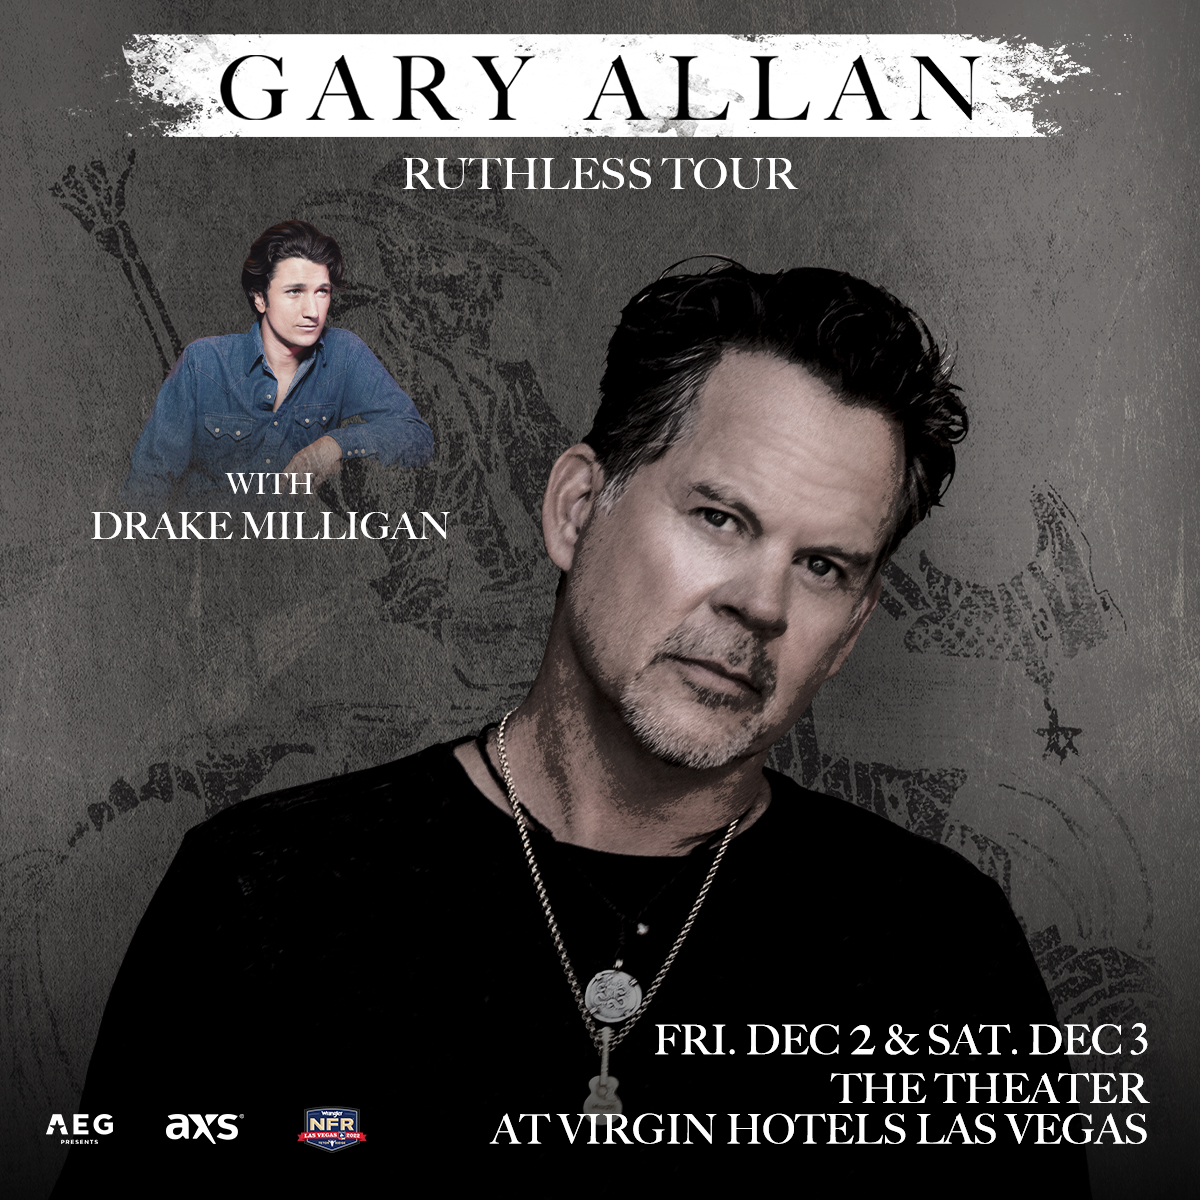 @GaryAllan is headed back to @vhlvtheater with special guest @DrakeMilligan on Friday, Dec. 2nd & Saturday, Dec. 3rd. If you are traveling to Vegas for @LasVegasNFR, make your plans NOW to see Gary and Drake after the rodeo! Get your tickets here: bit.ly/GAVegas2022